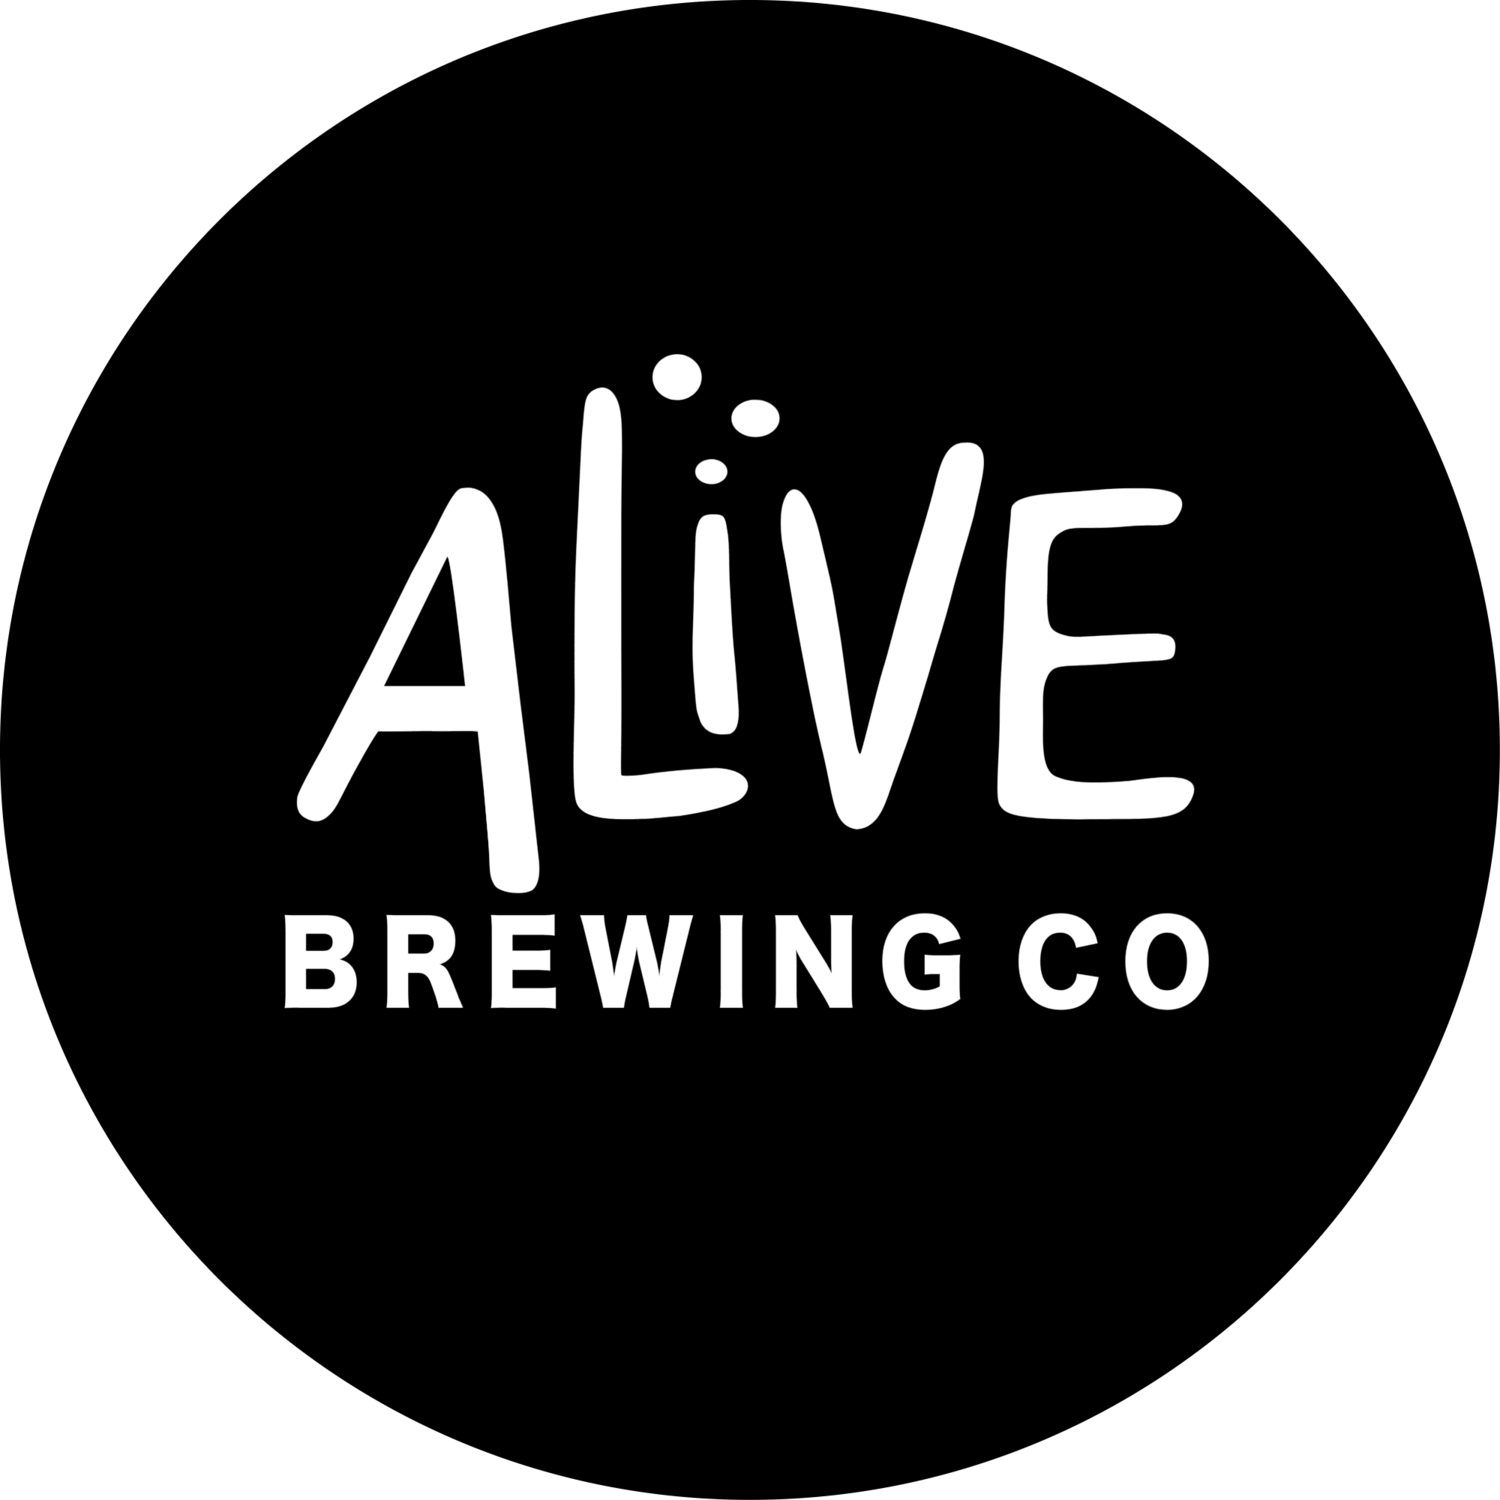 Alive Brewing Co